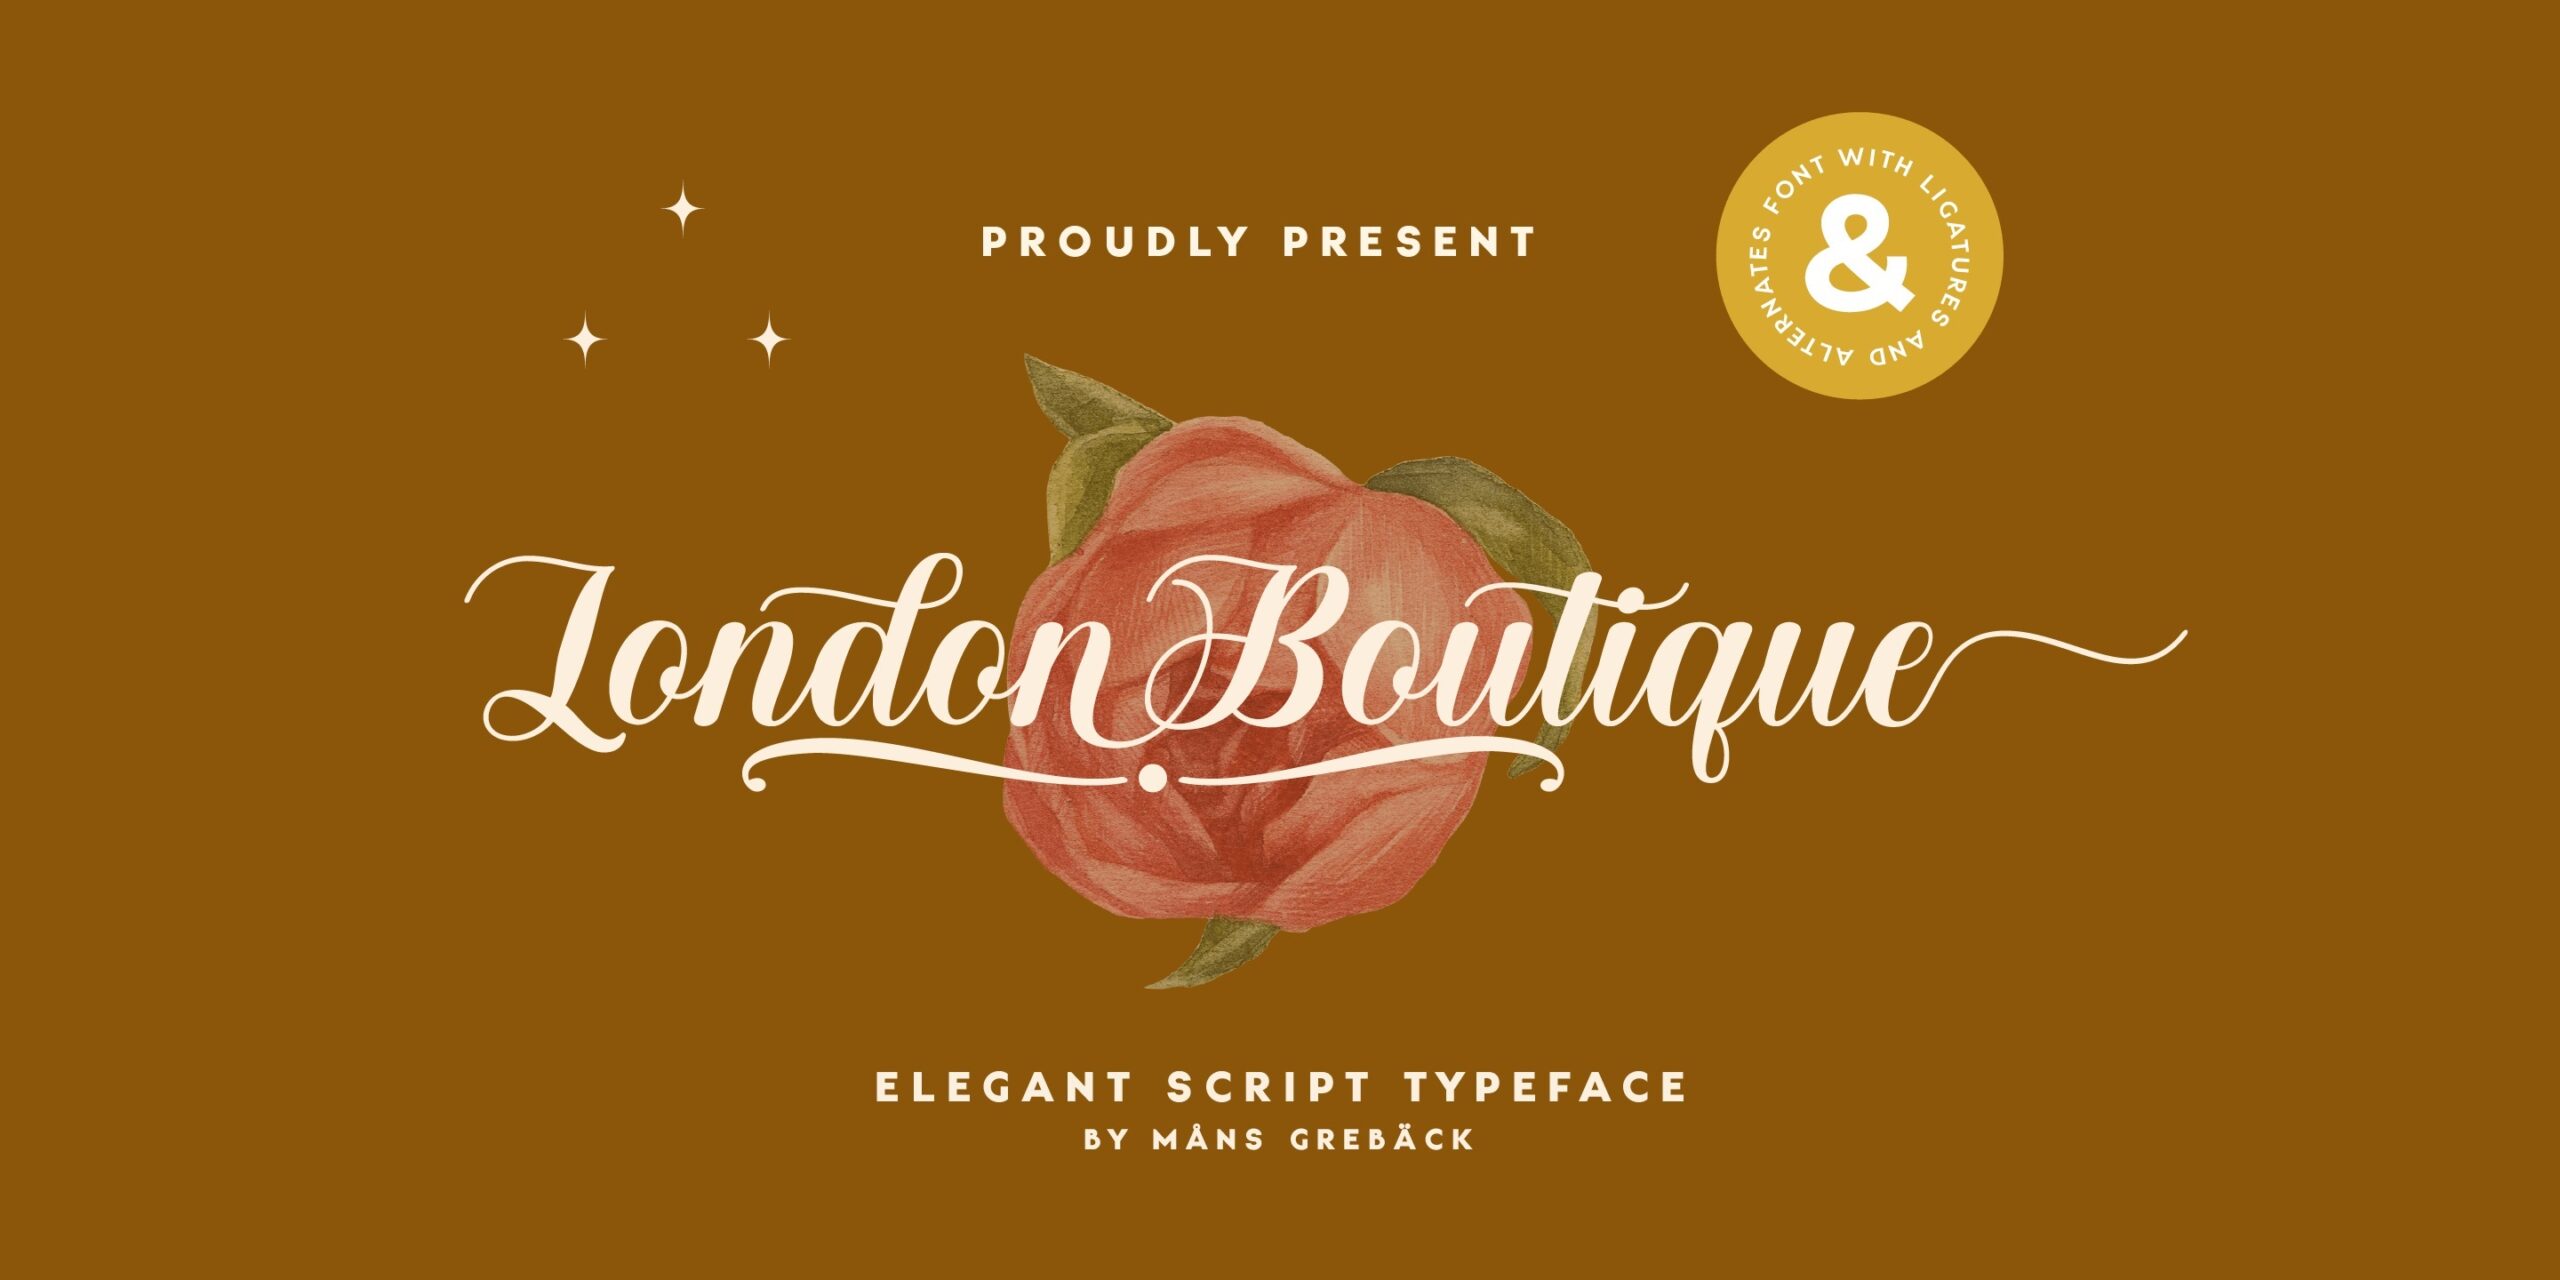 Preview and download London Boutique font